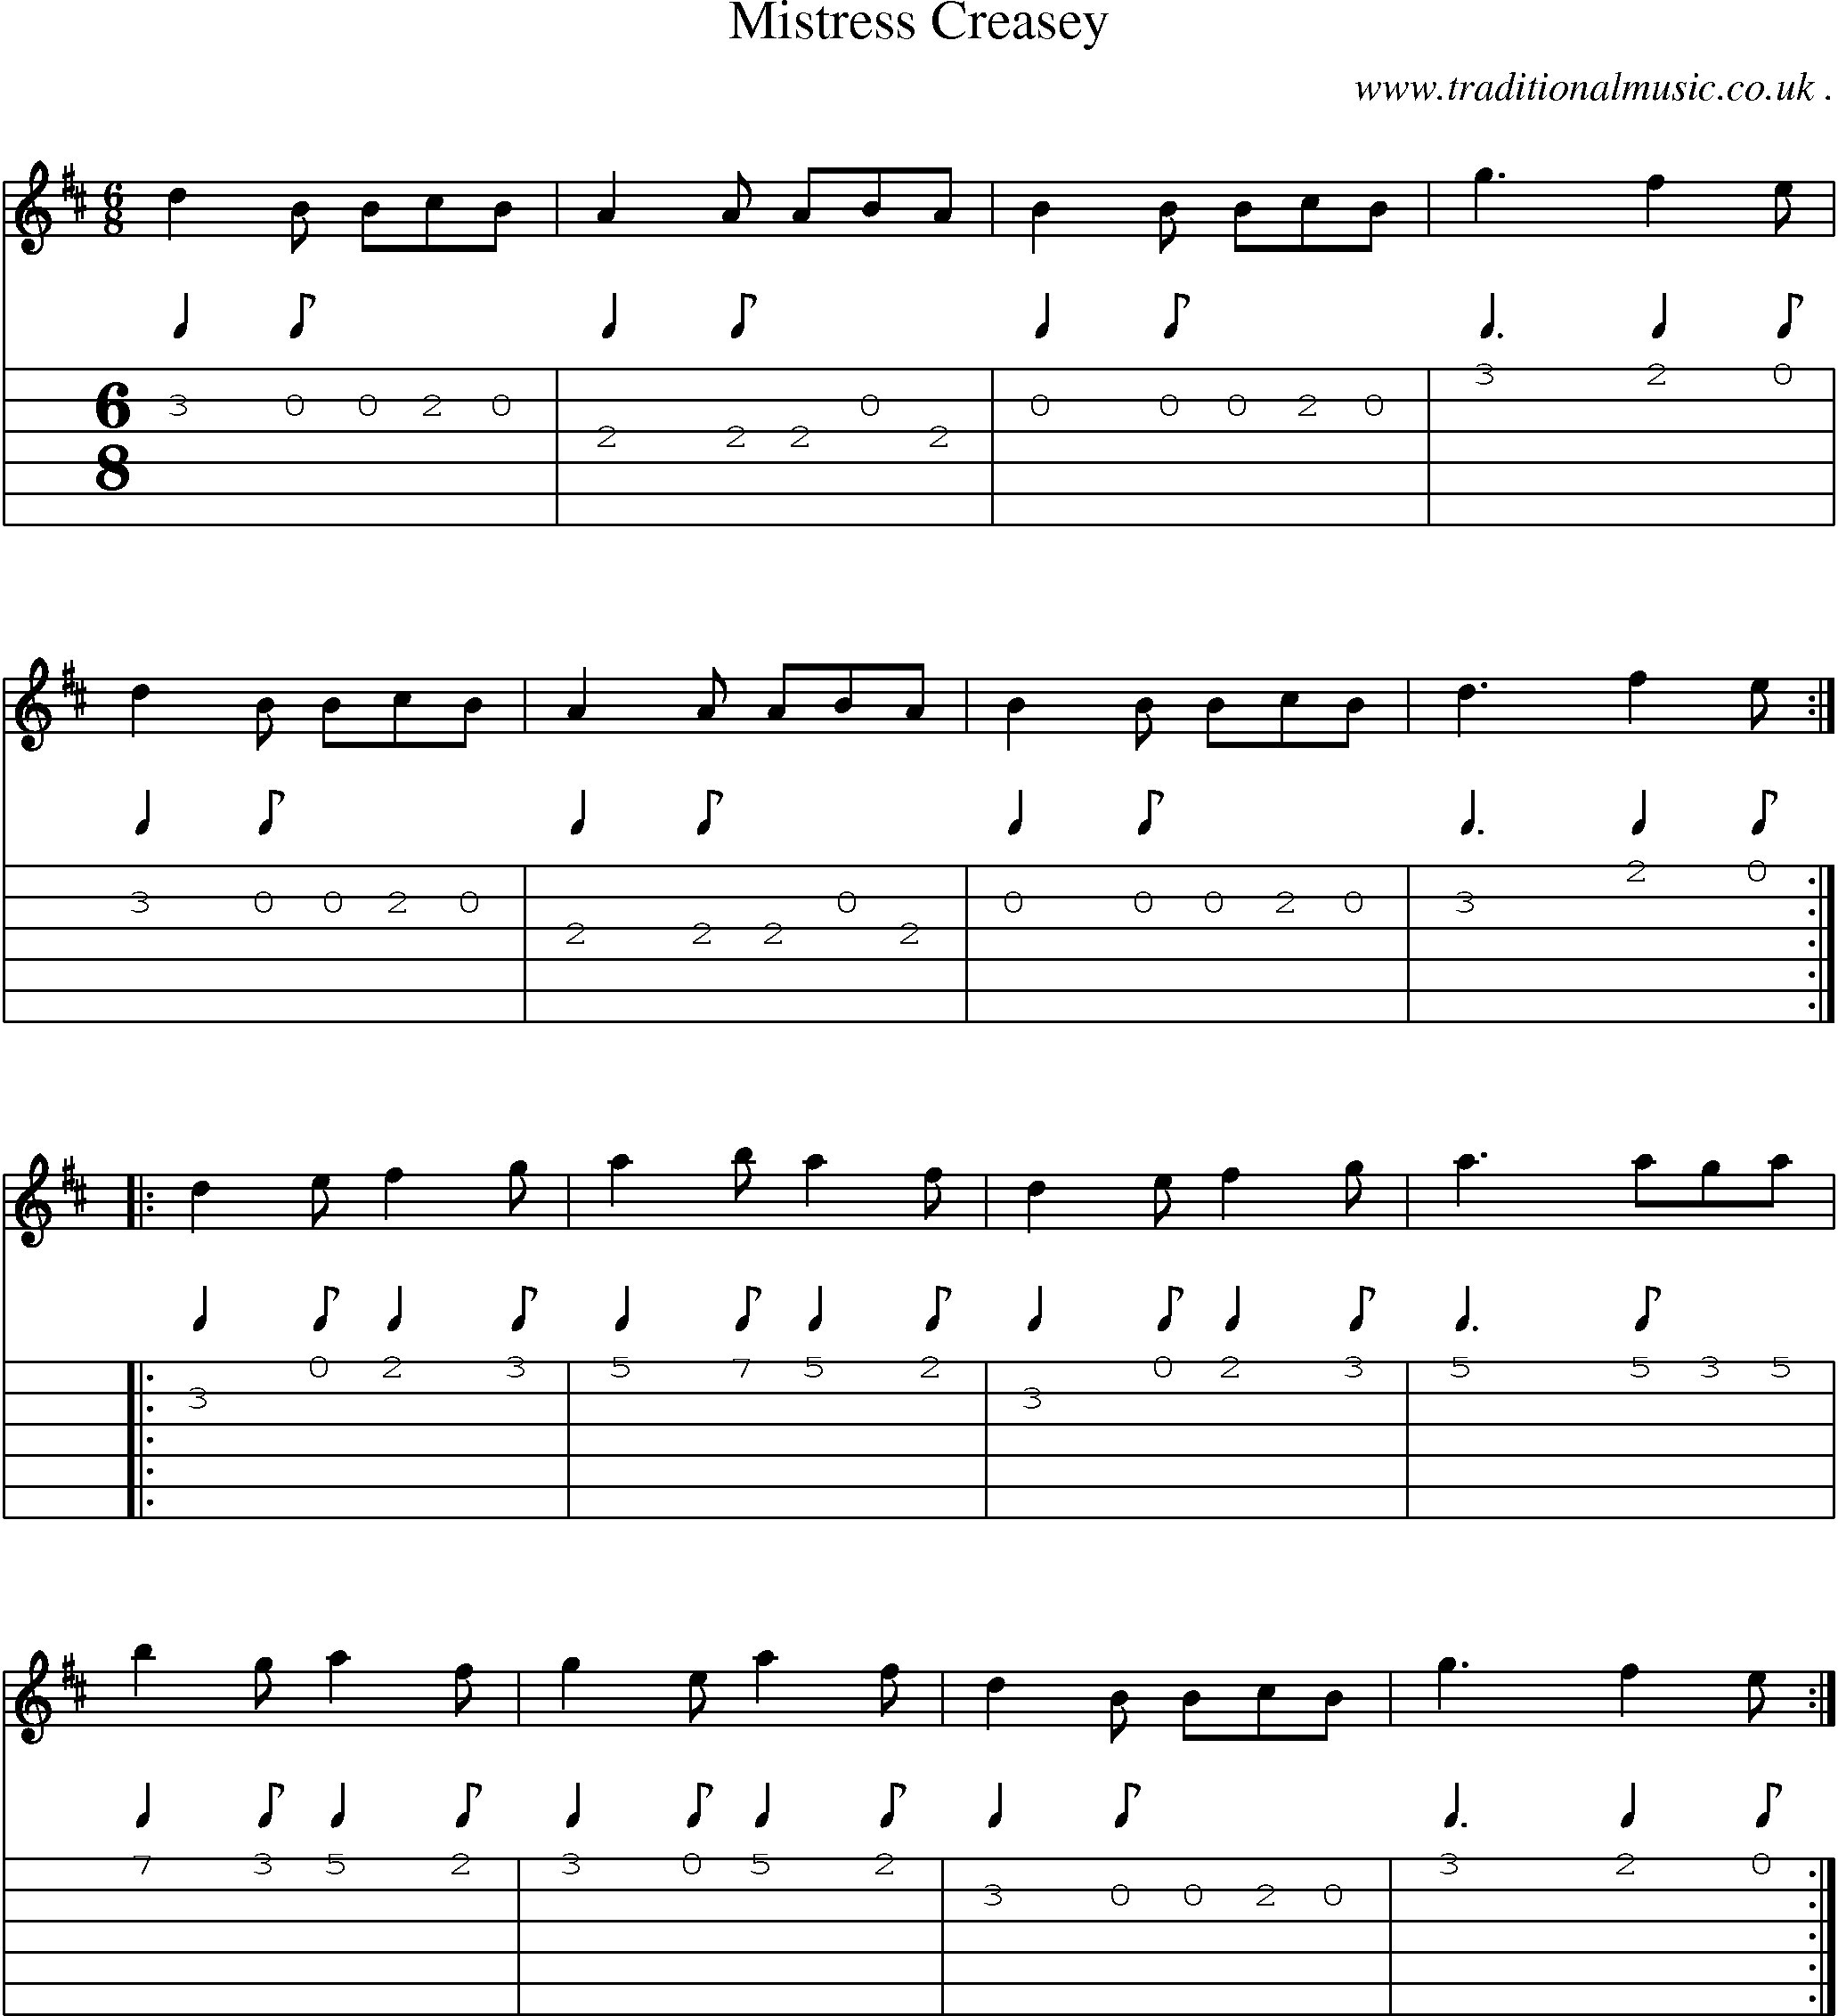 Sheet-Music and Guitar Tabs for Mistress Creasey